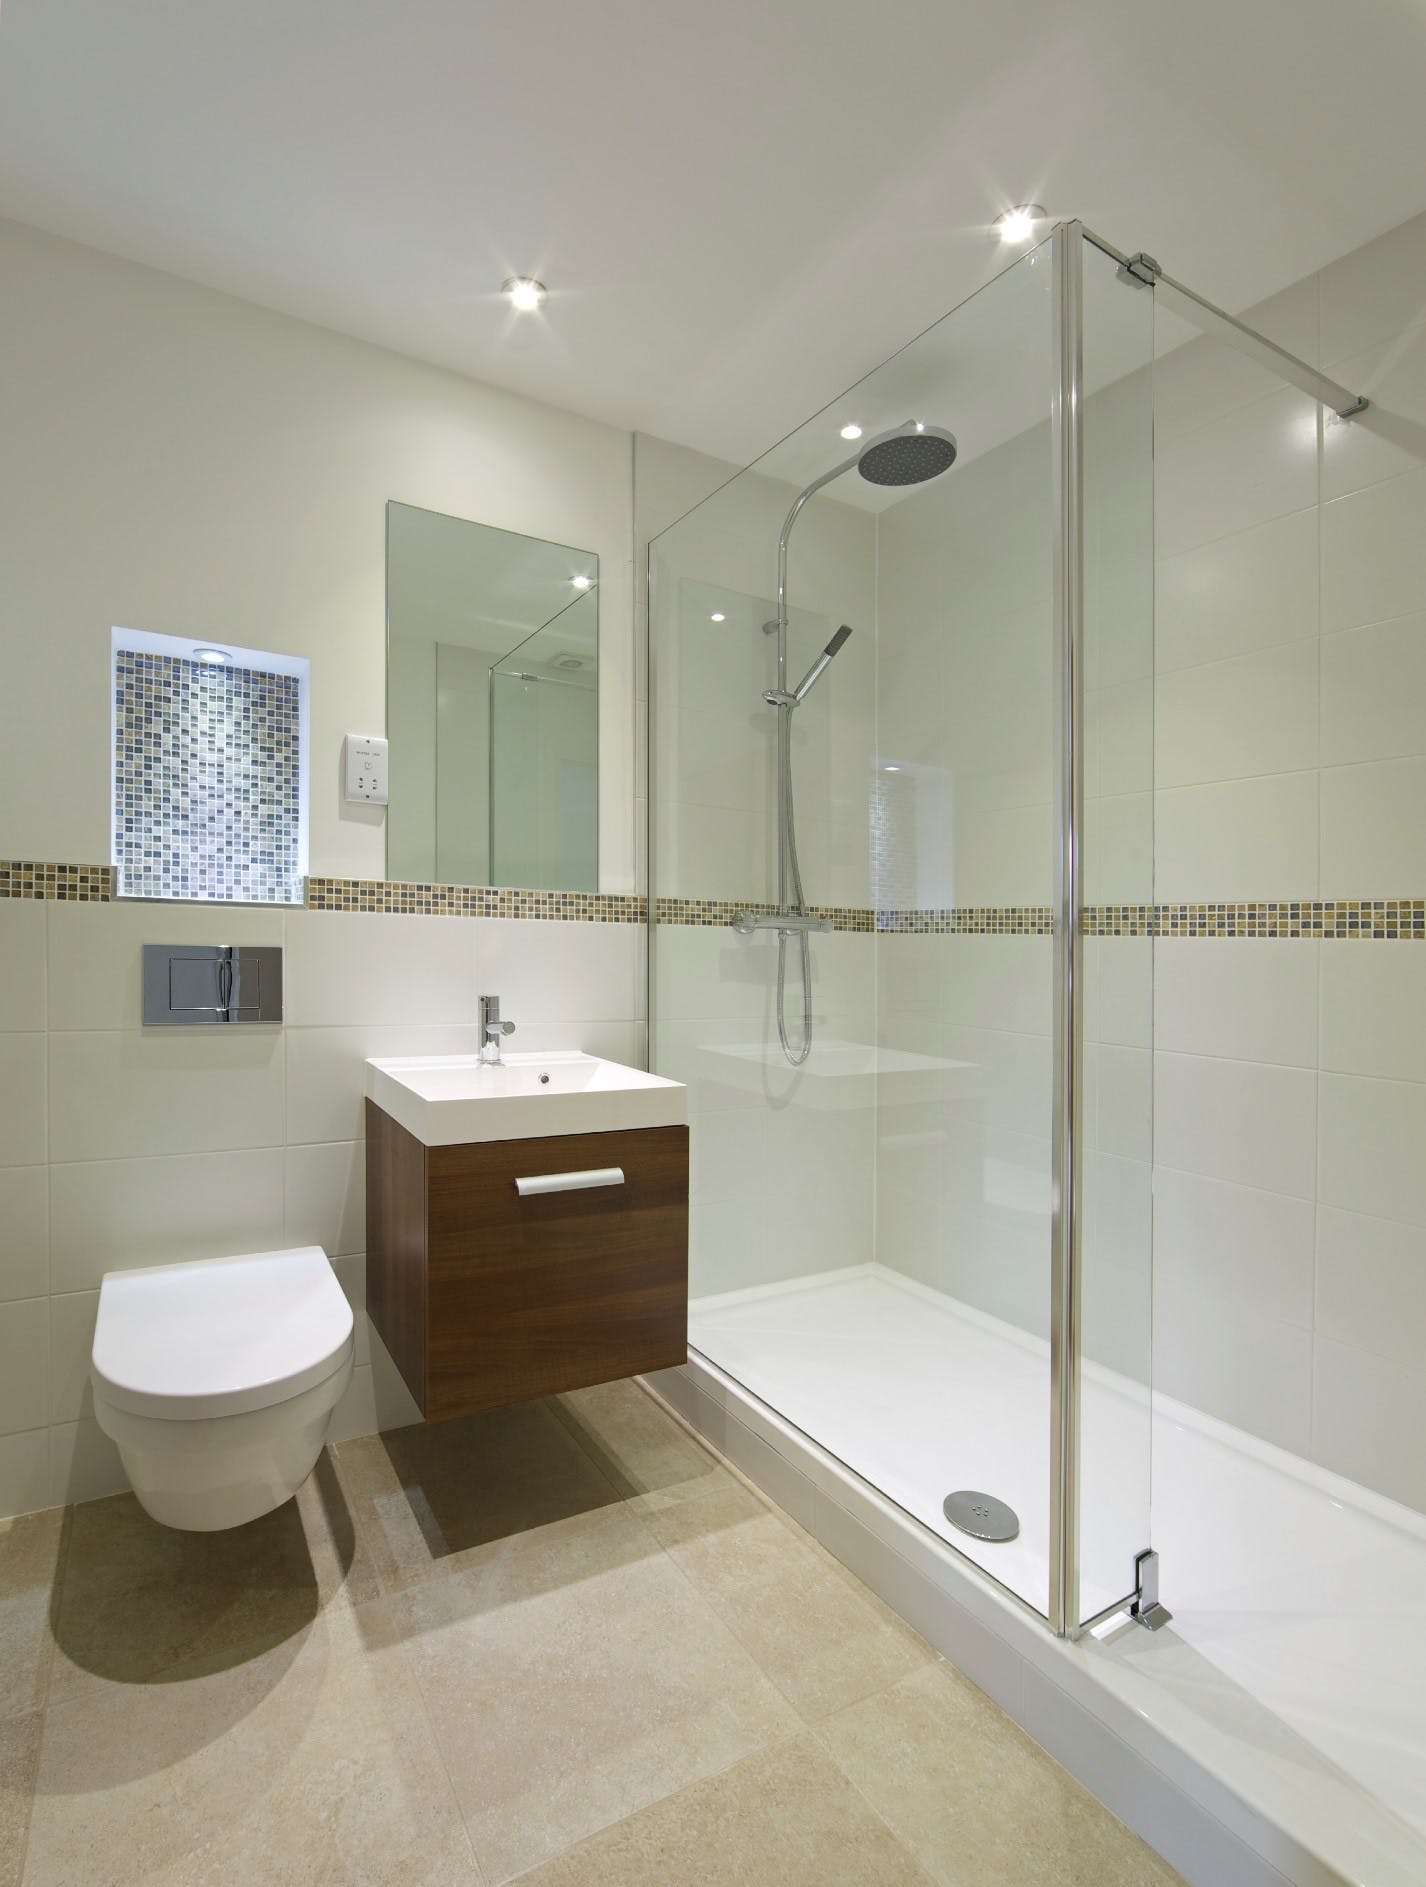  Shower  Room  Ideas  Small Shower  Room  Layout